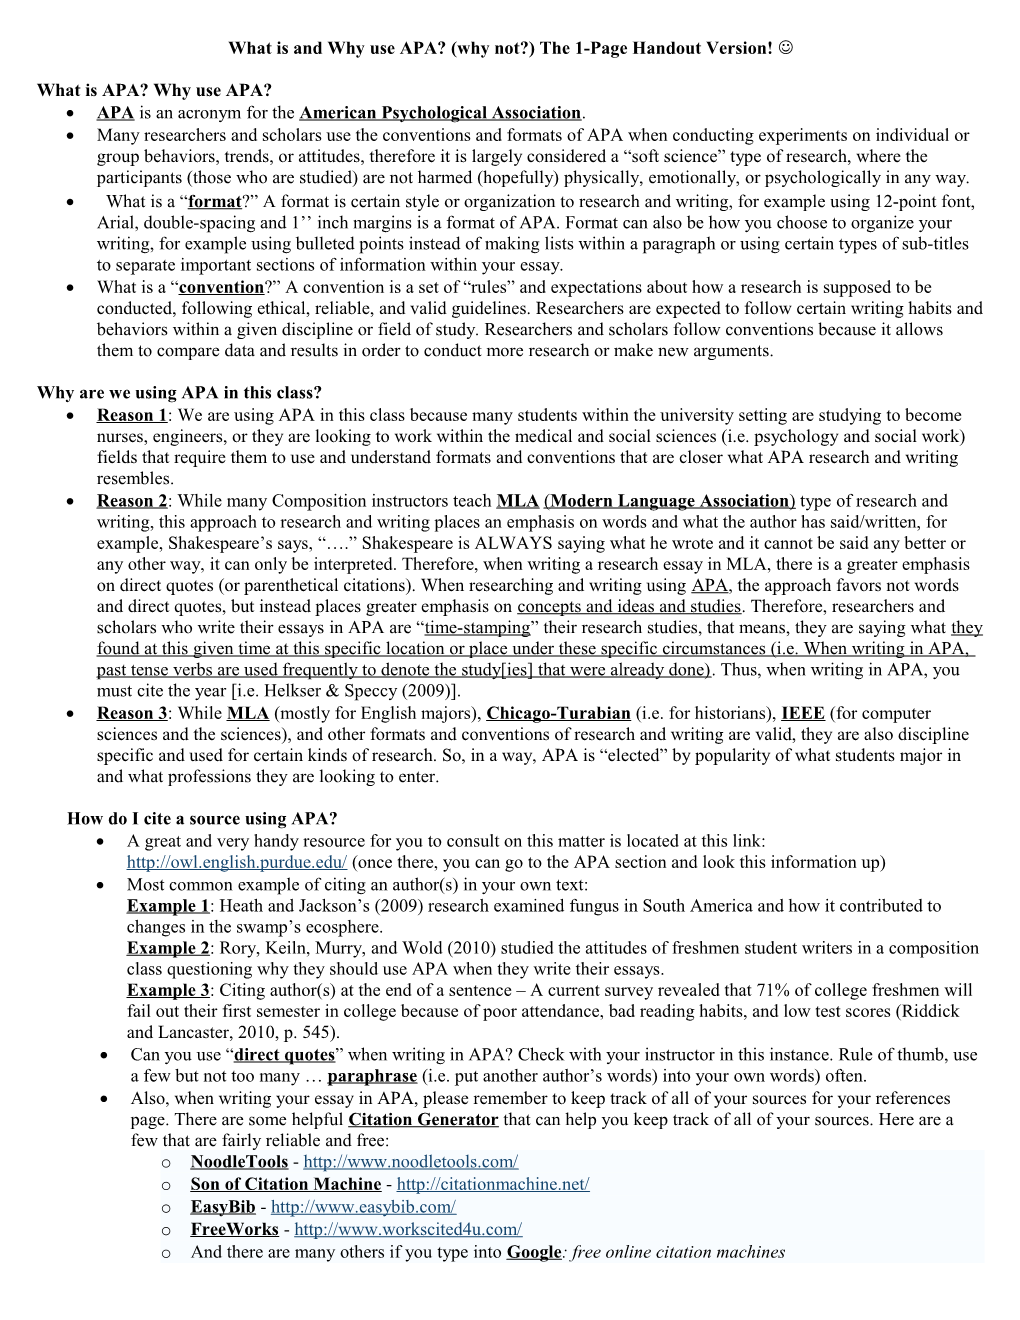 What Is and Why Use APA? (Why Not?) the 1-Page Handout Version! J